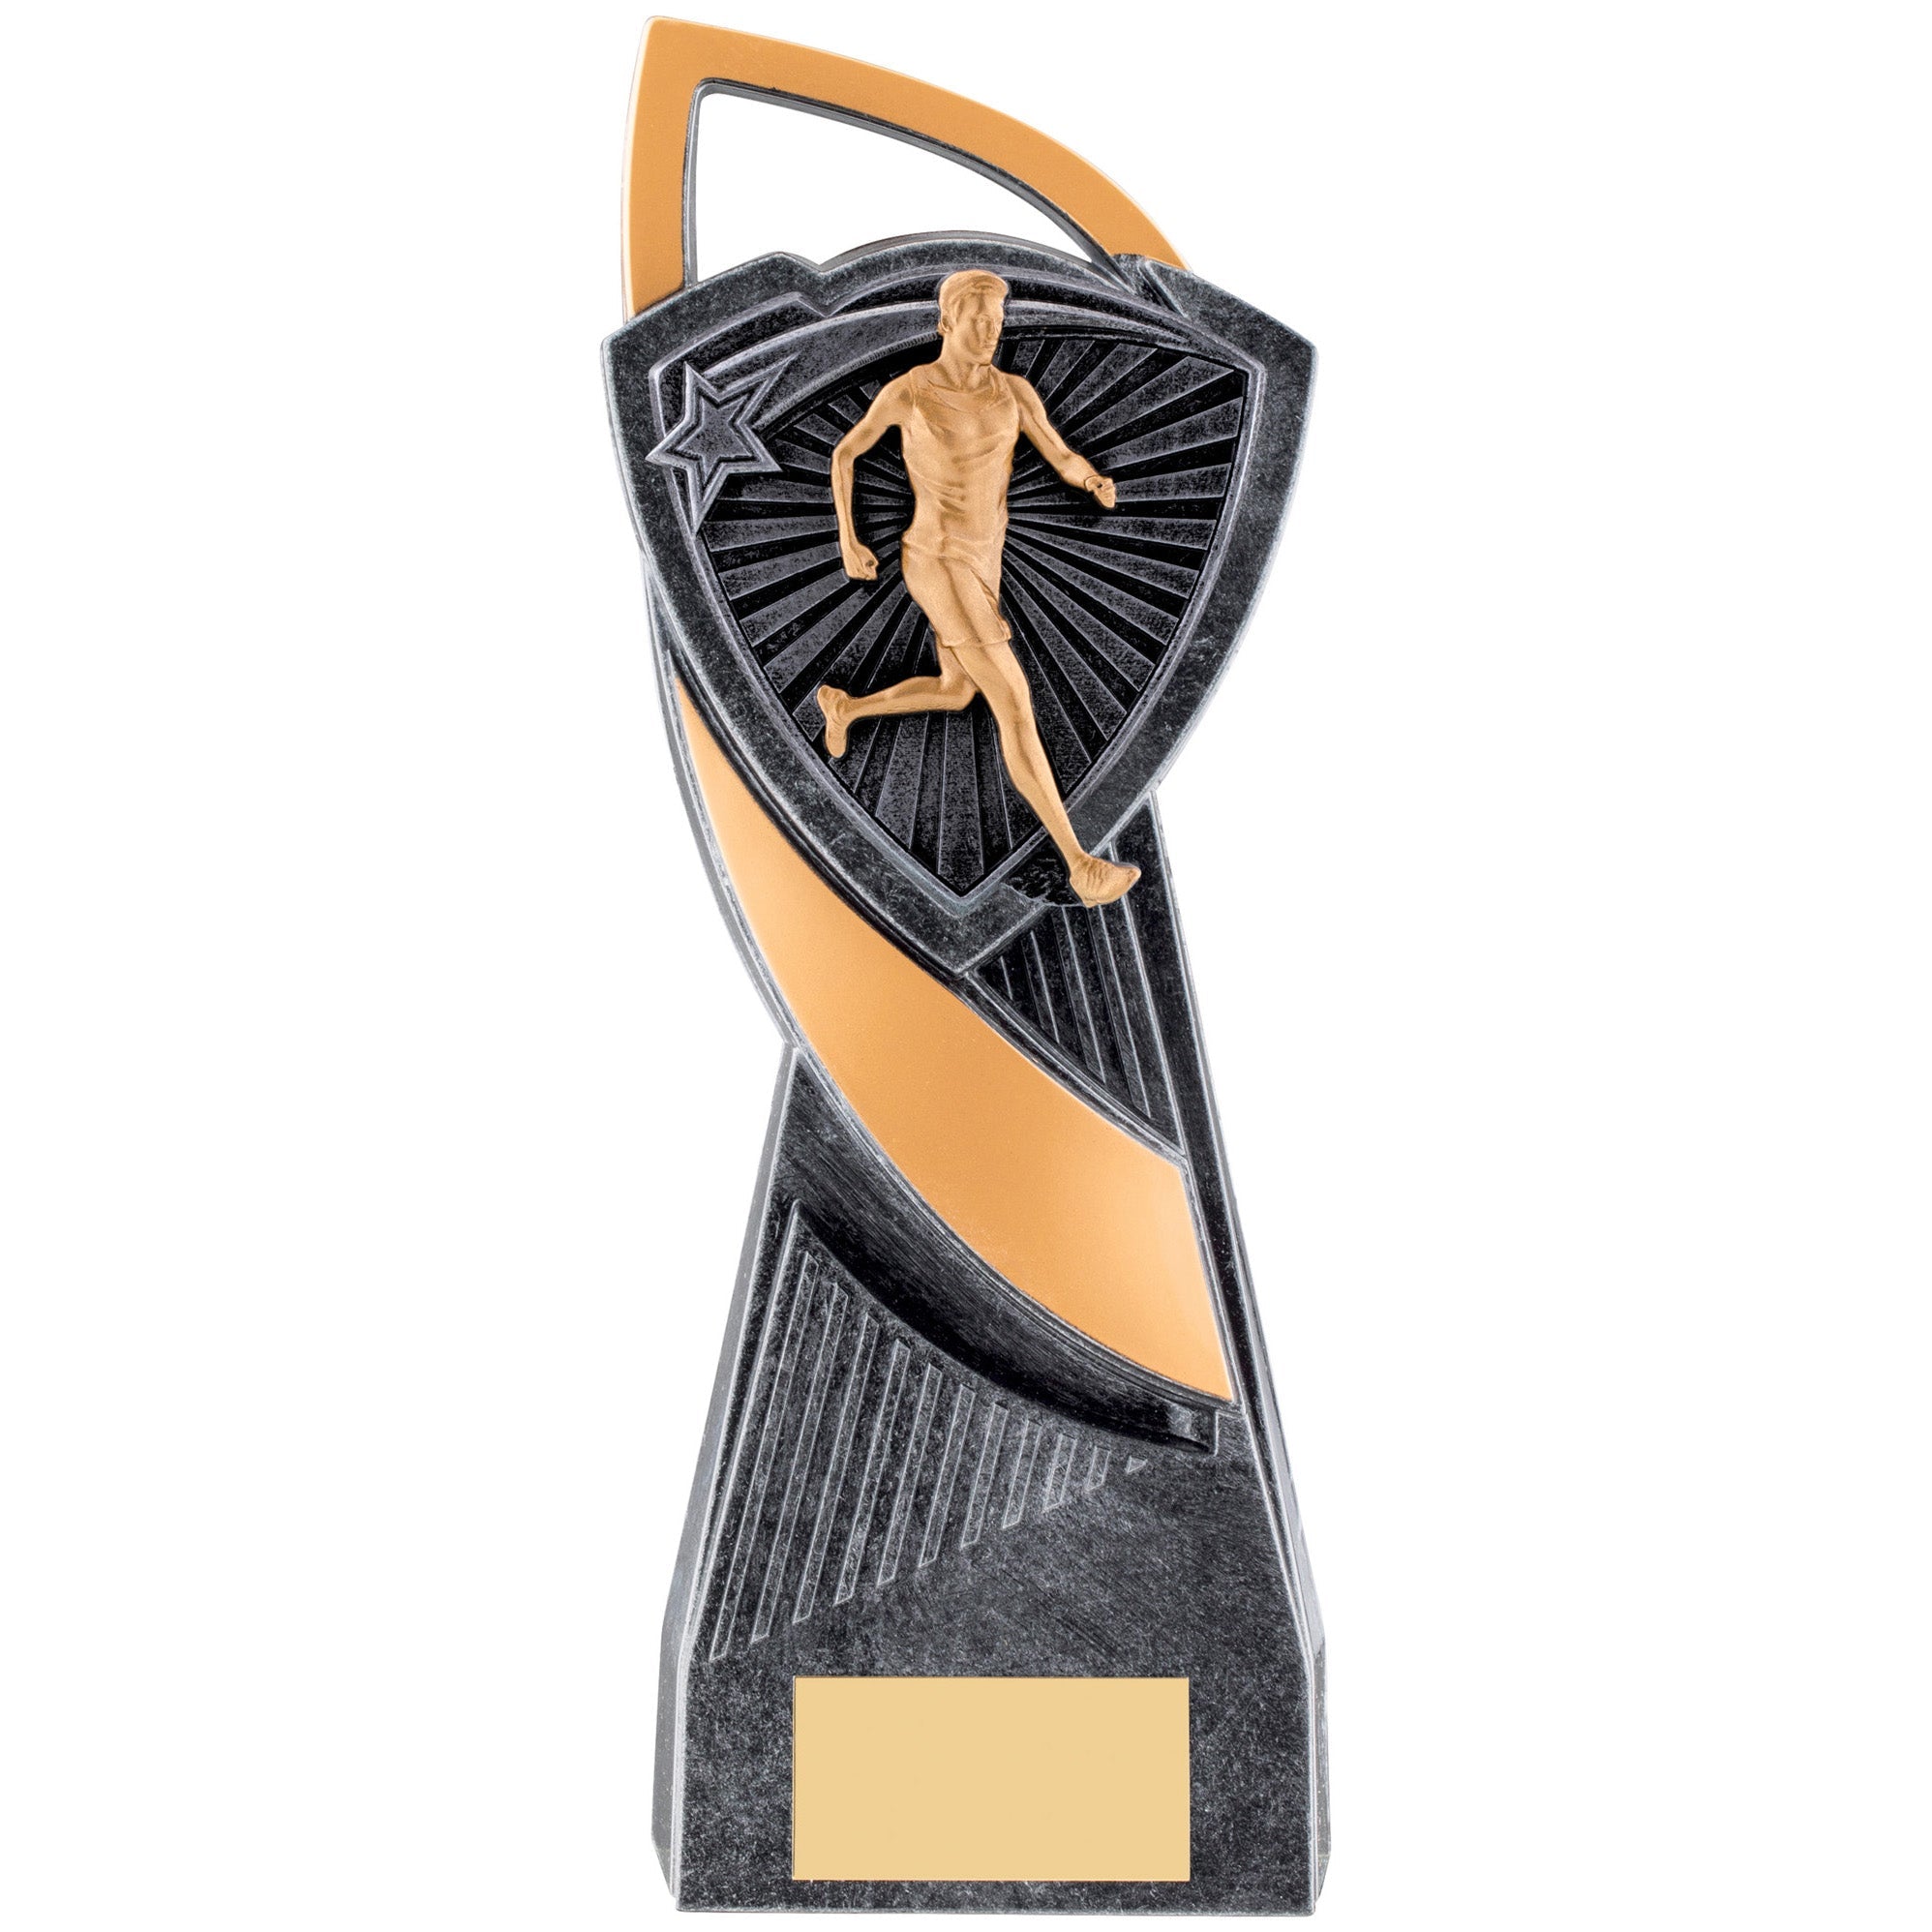 Utopia Male Running Trophy (Gold/Silver)